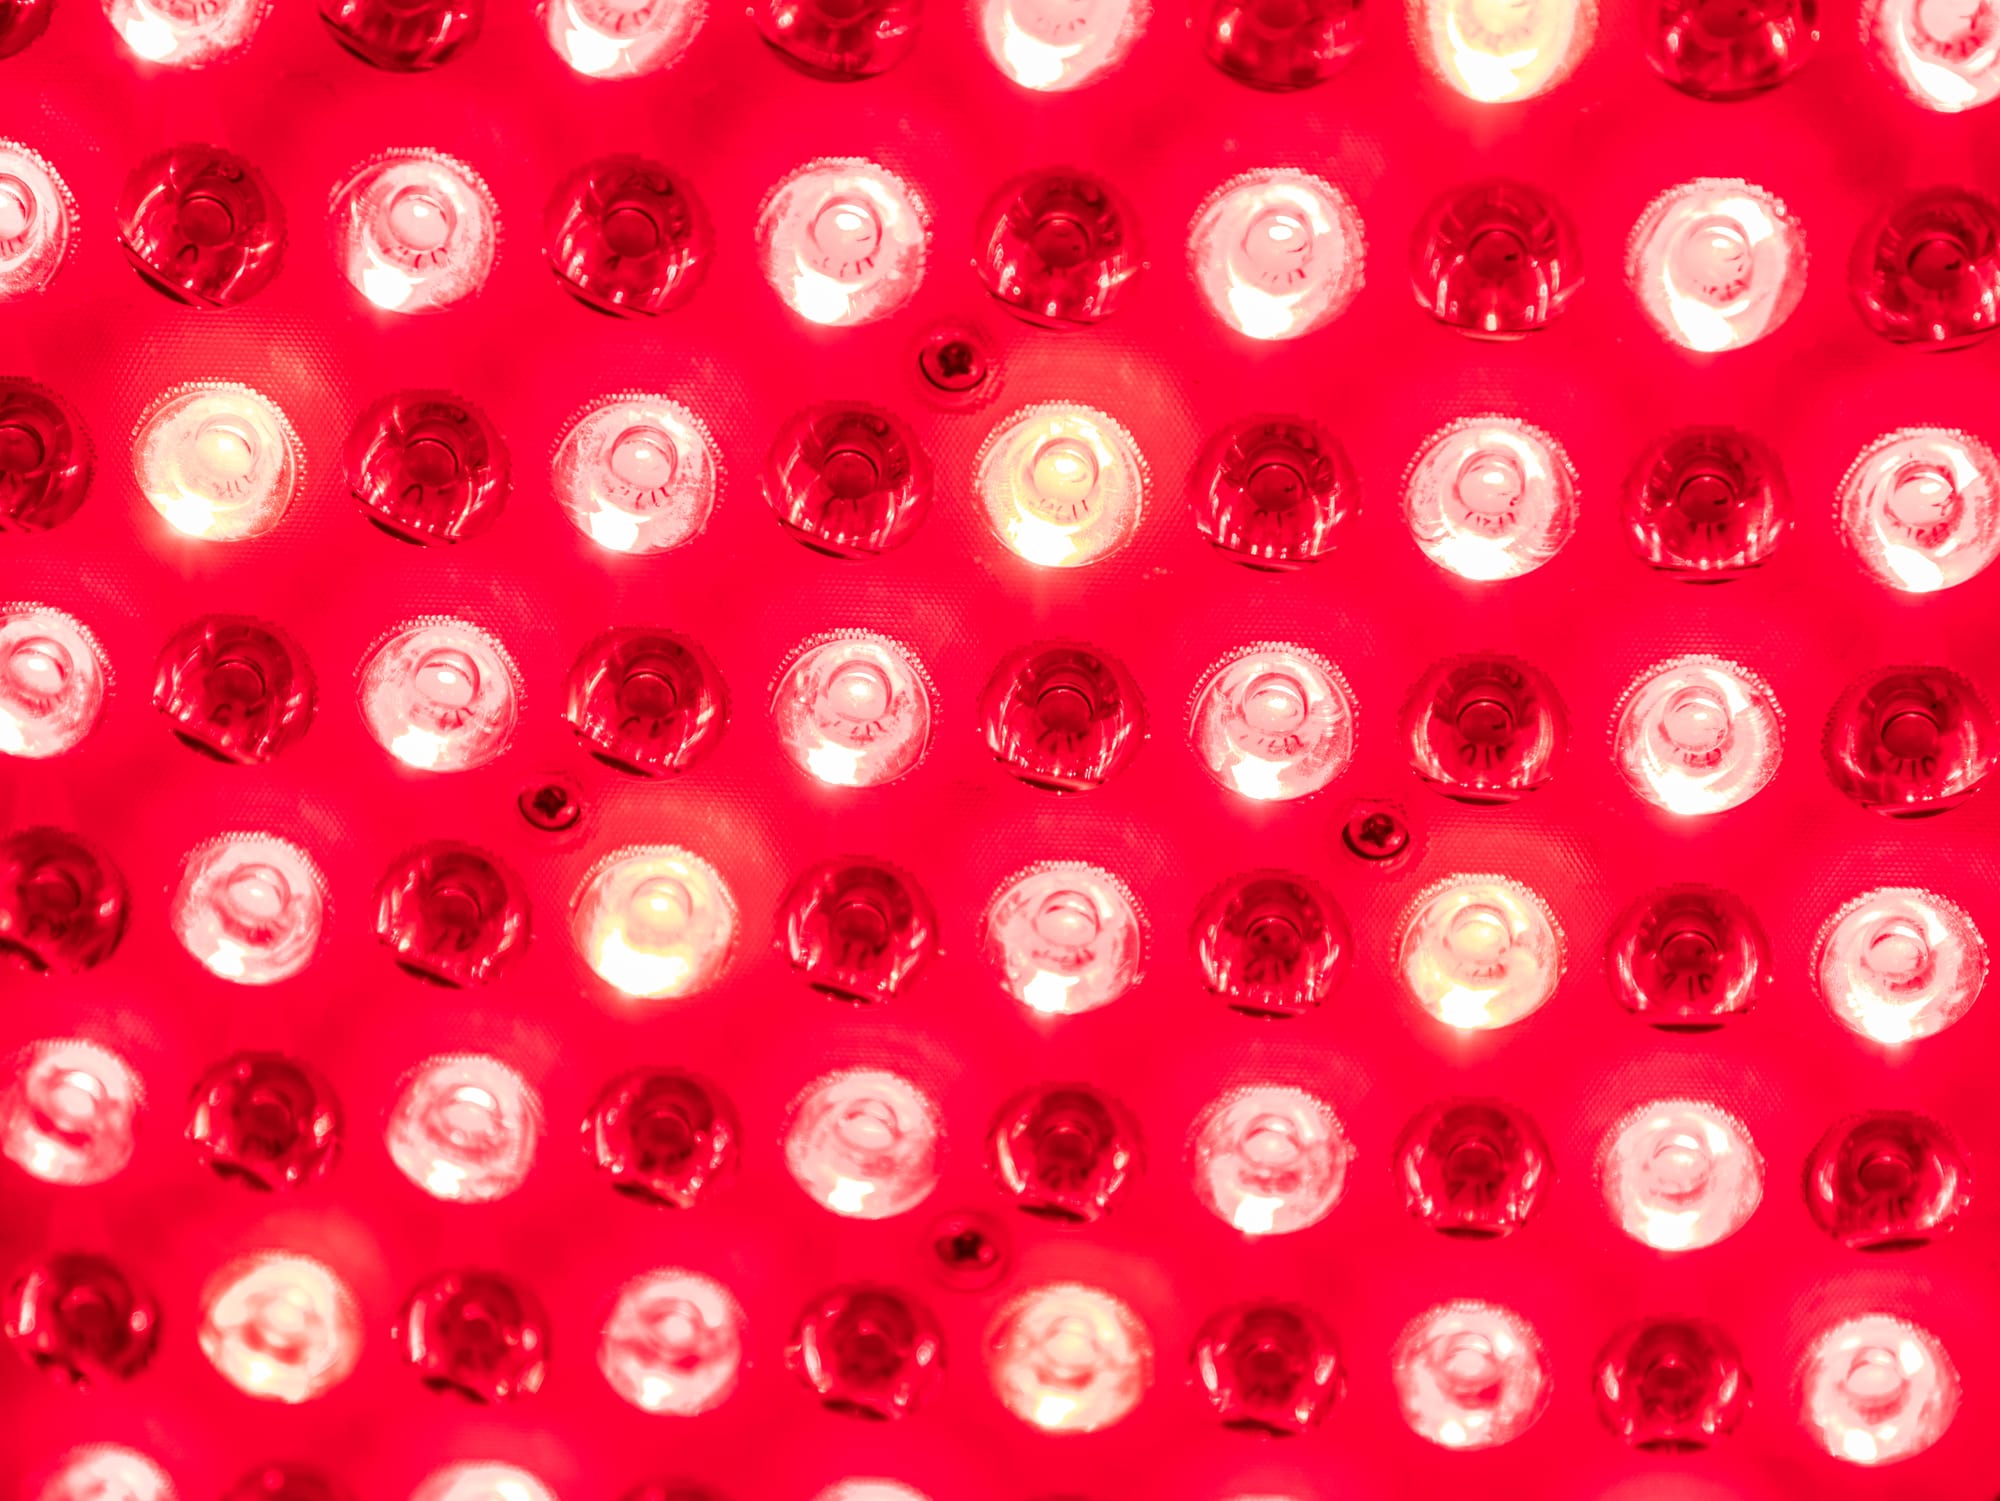 Red Light Therapy: The Complete Guide